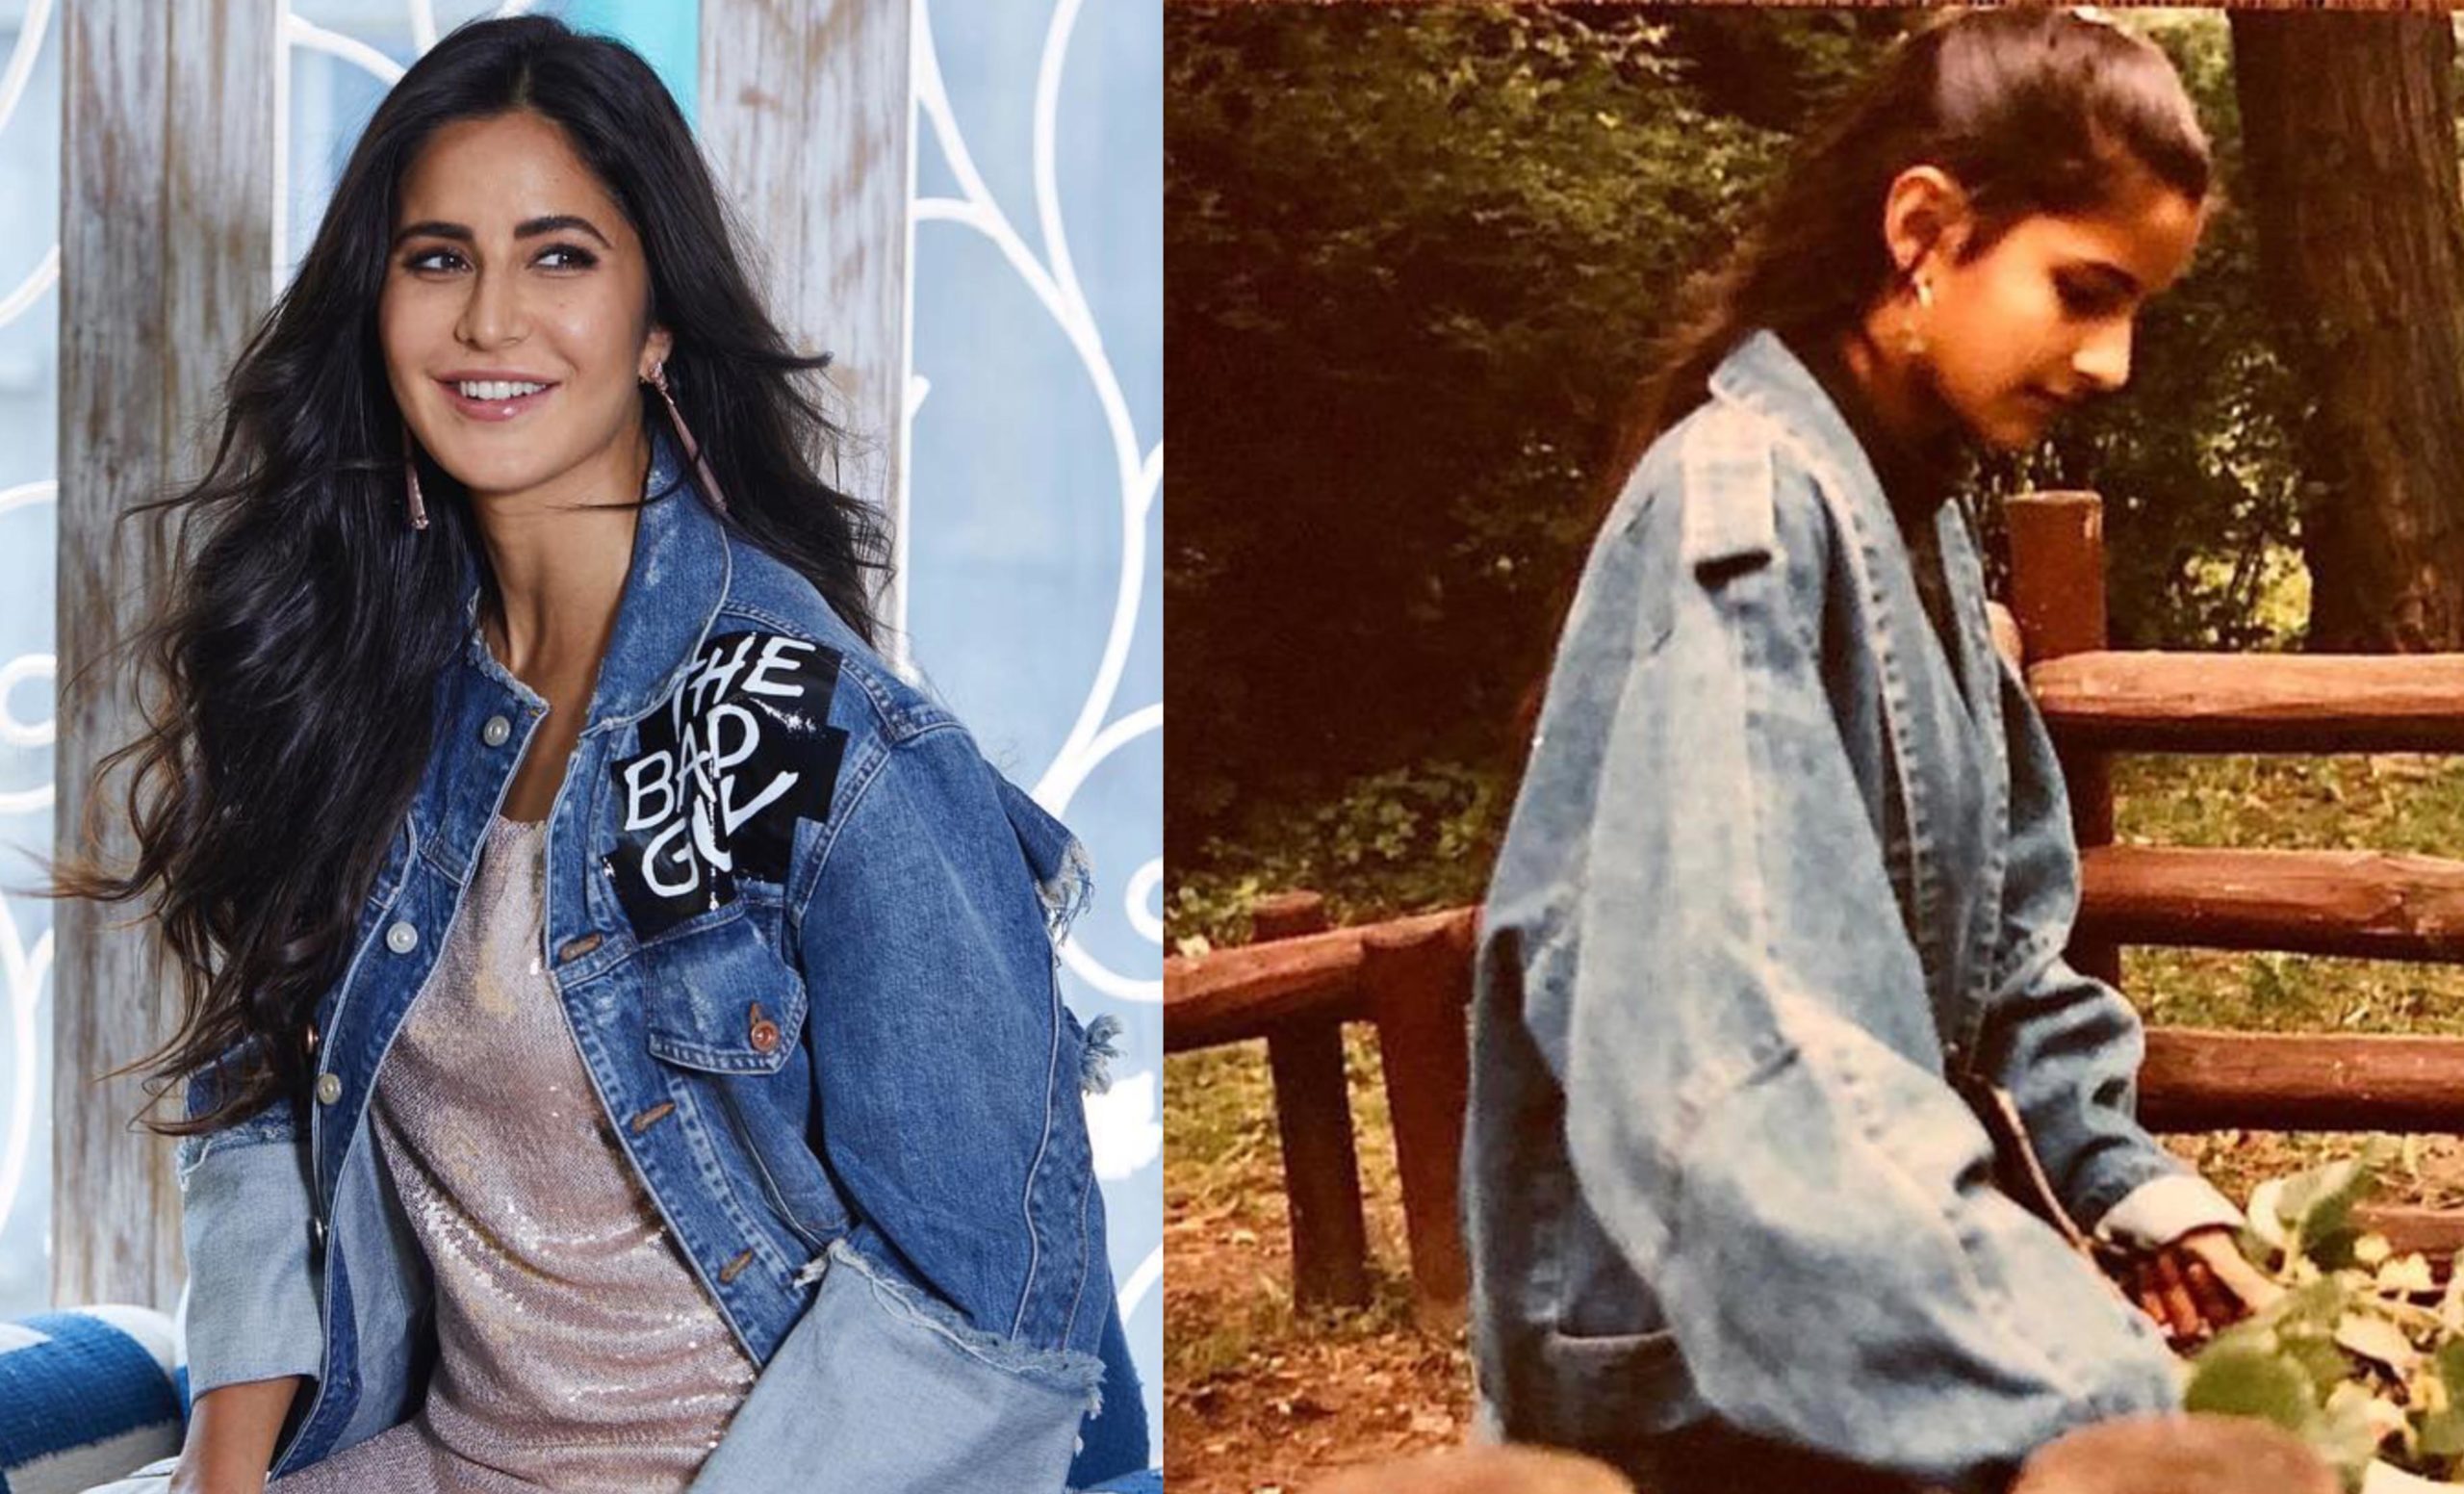 Katrina Kaif’s Latest Image Is A Trip Down The Memory Lane, Where Her Style Was Still On Point